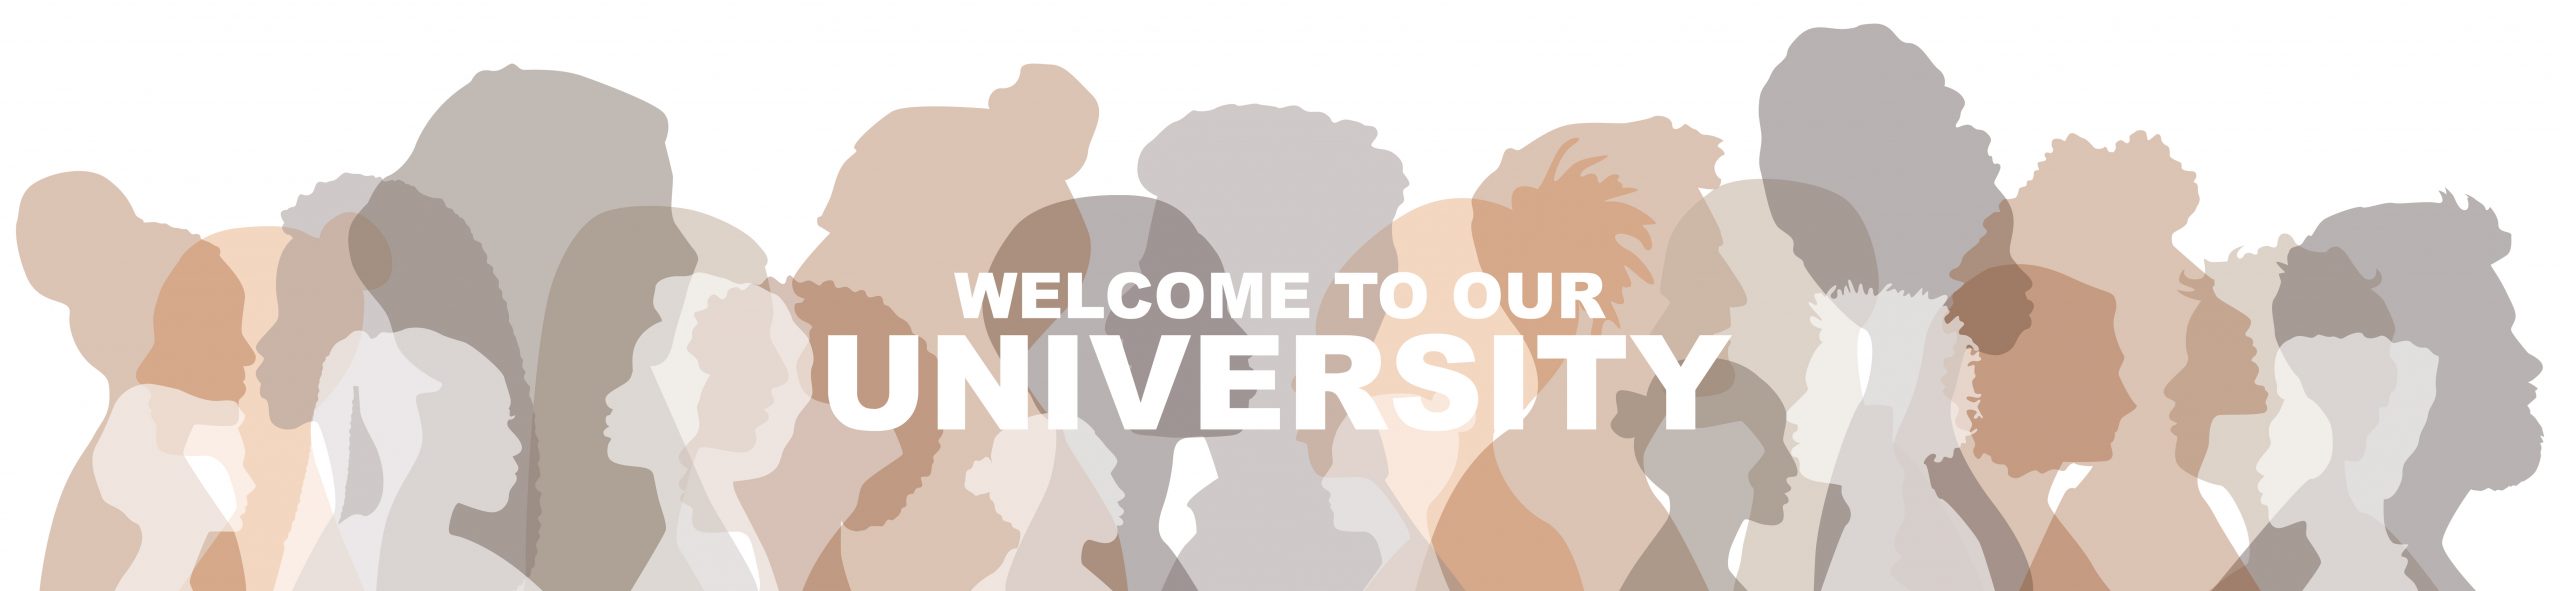 Figure Image of People in Pastel Colors and Welcome to Our University Text 